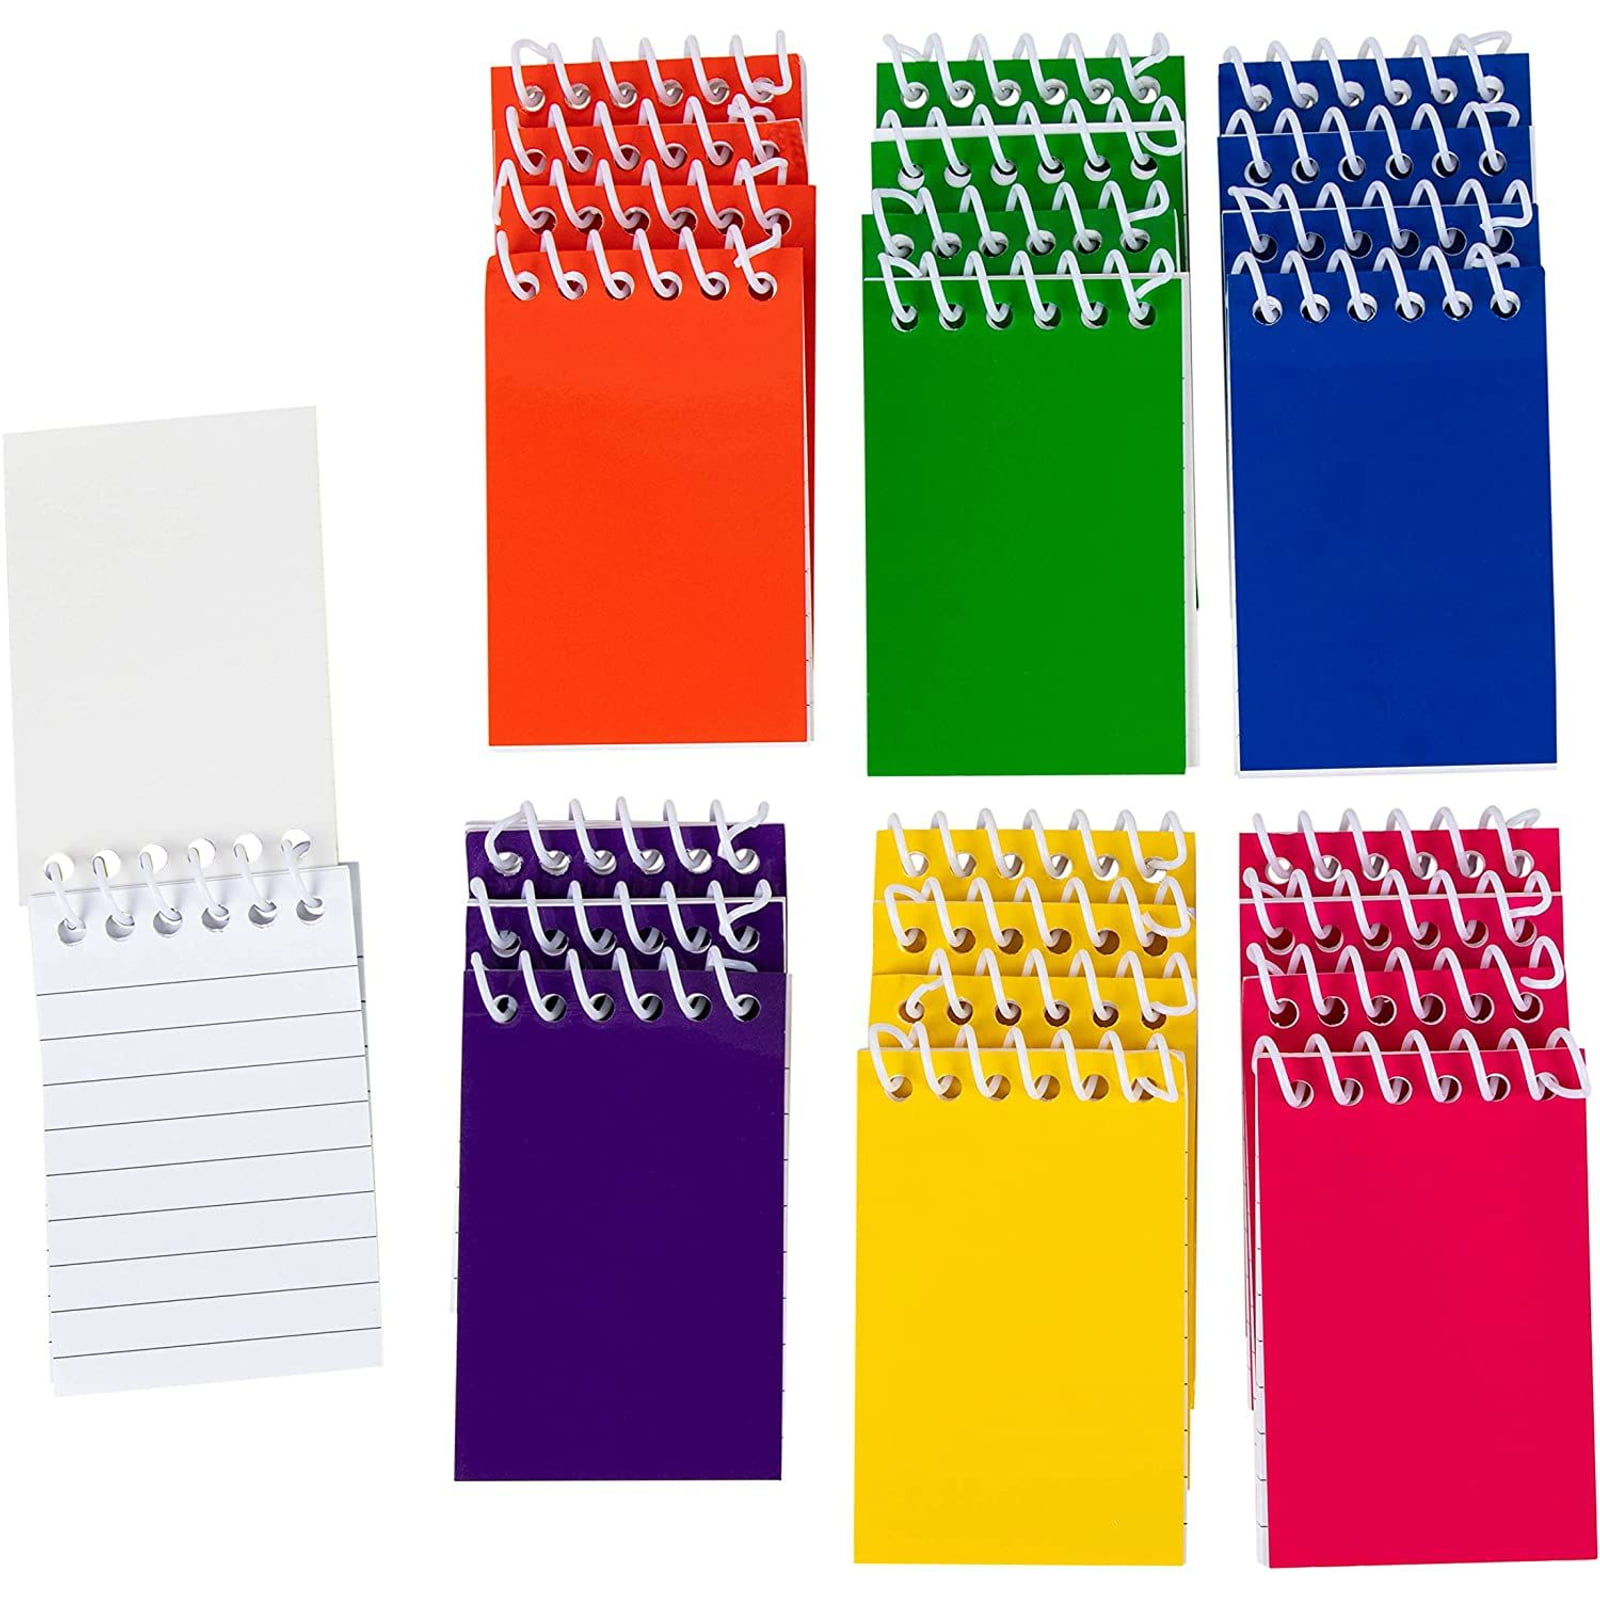 A7 Memo Pads Notebooks Small Pocket Sized Notepad Ruled Lined Pages Stationery